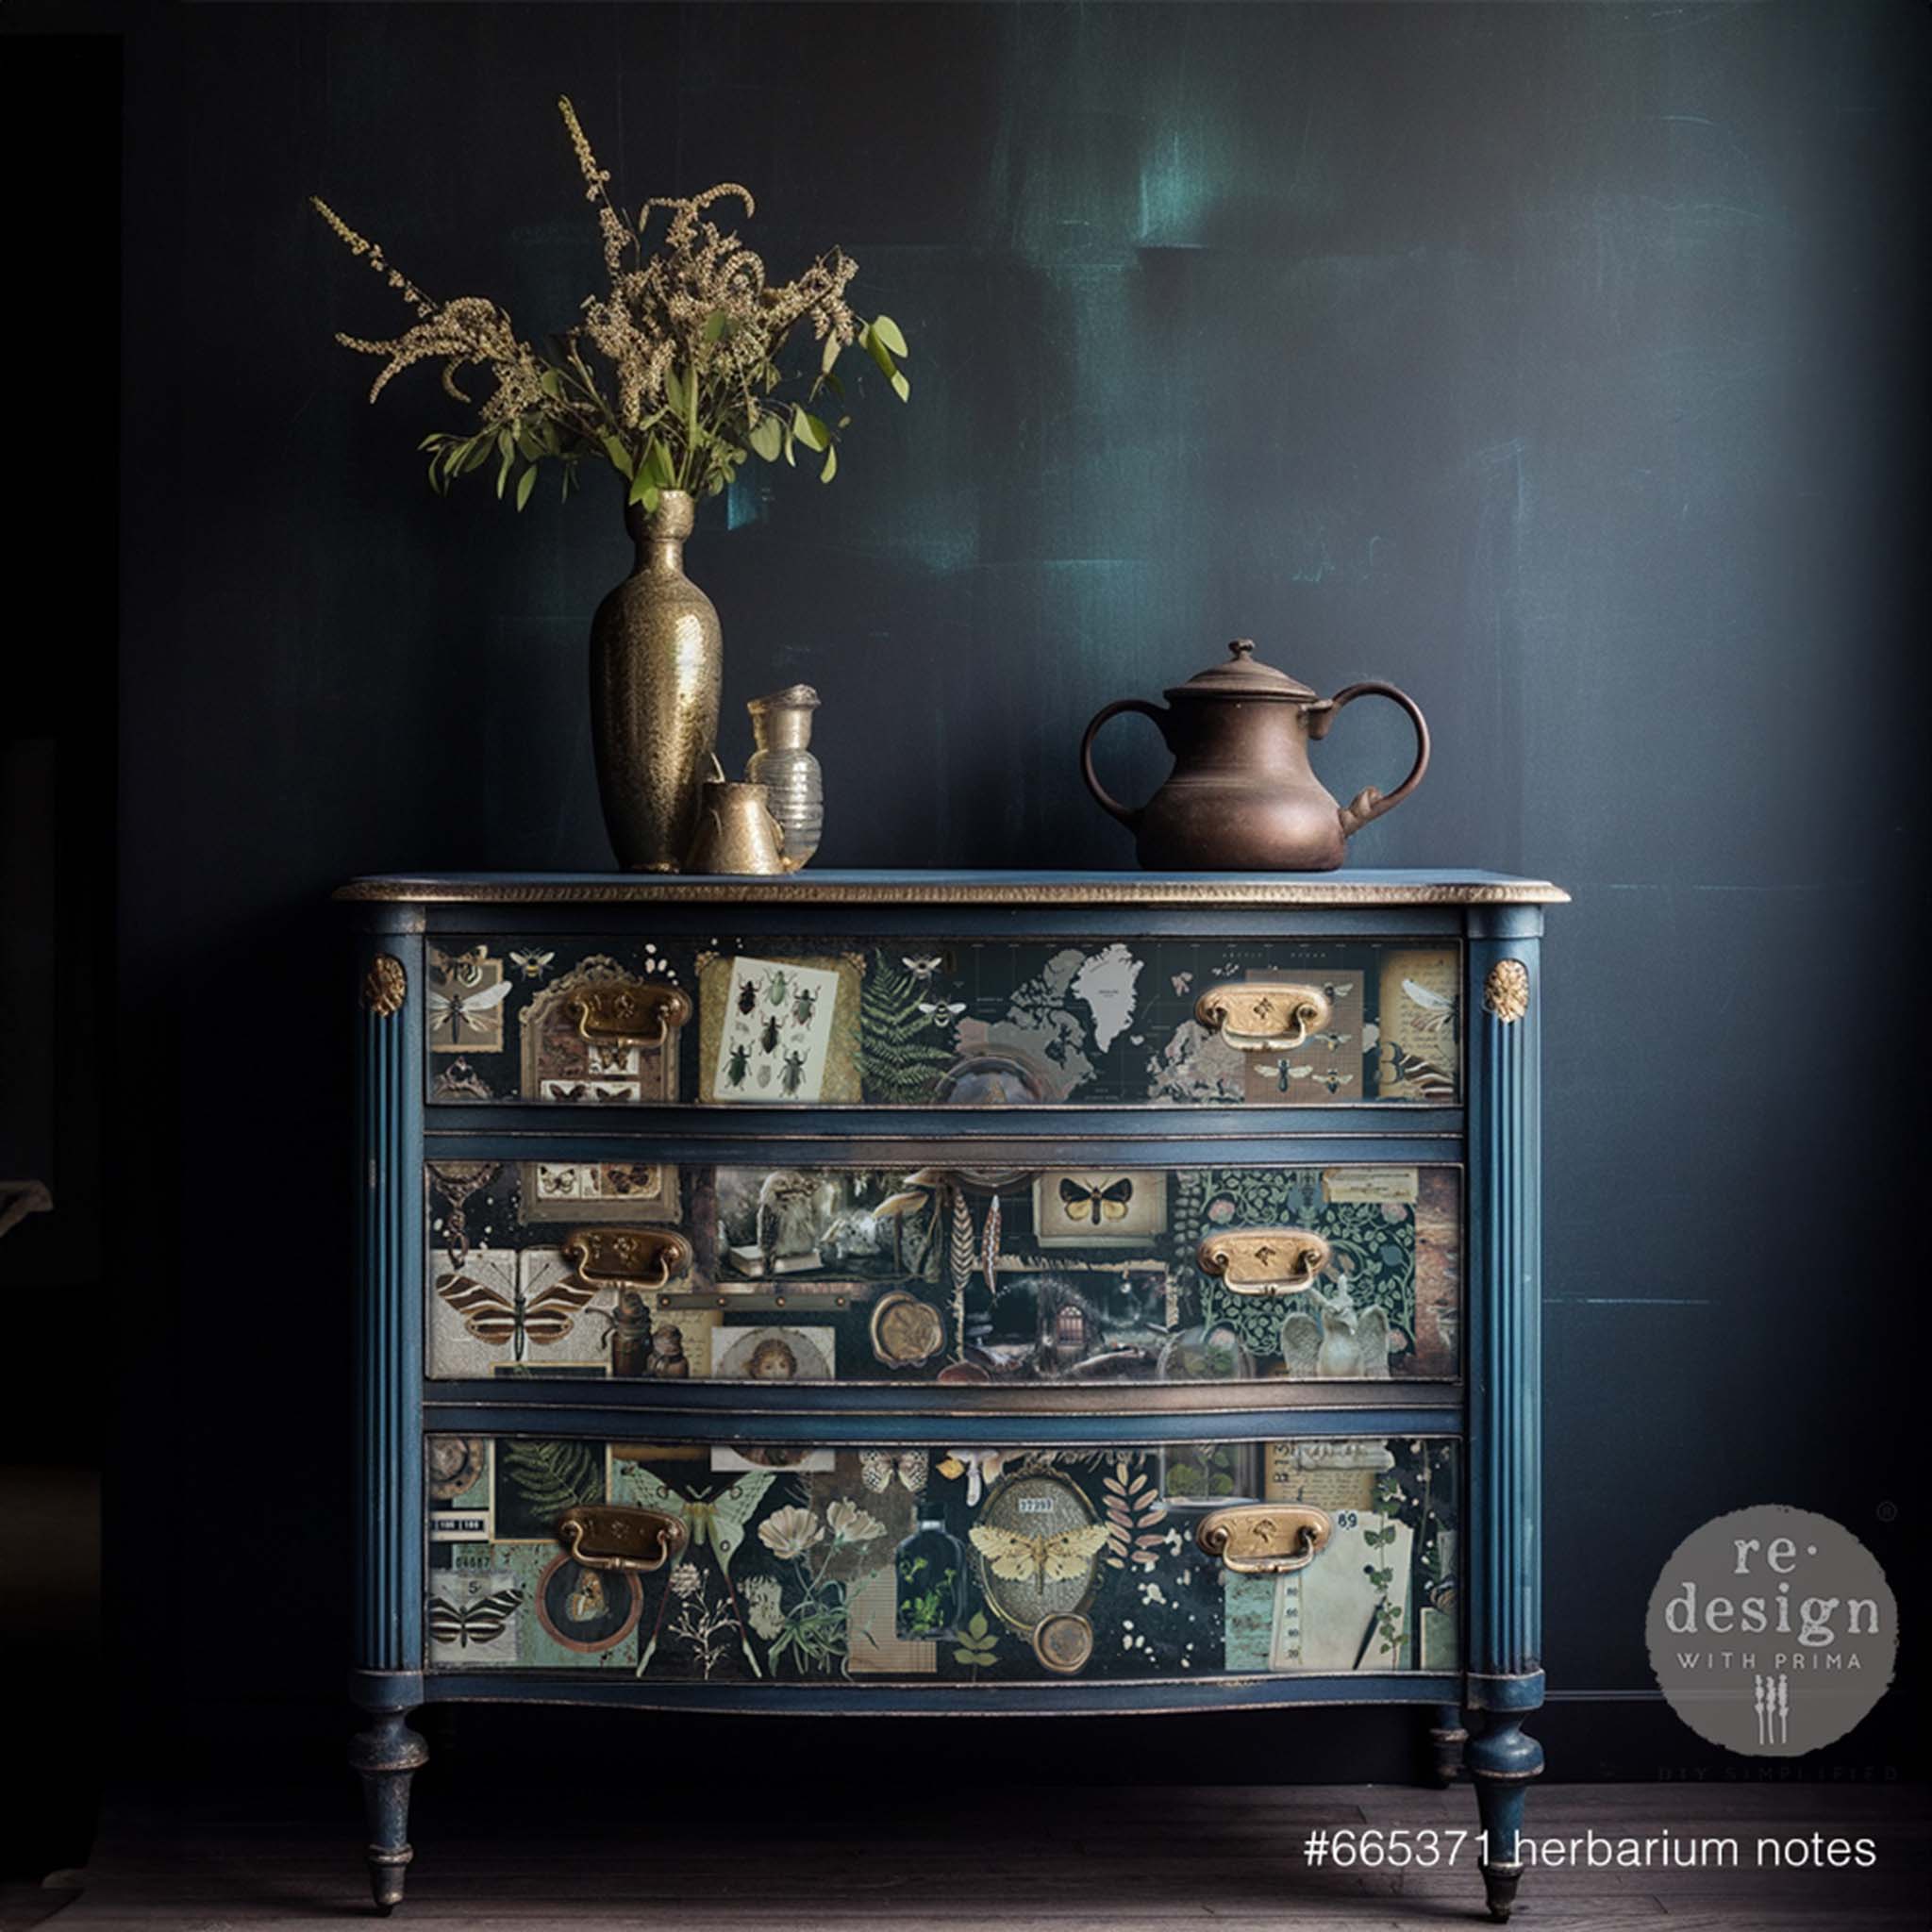 A dark blue 3-drawer side table repurposed by ReDesign with Prima is painted blue with gold accents and features Herbarium Notes on its drawers.